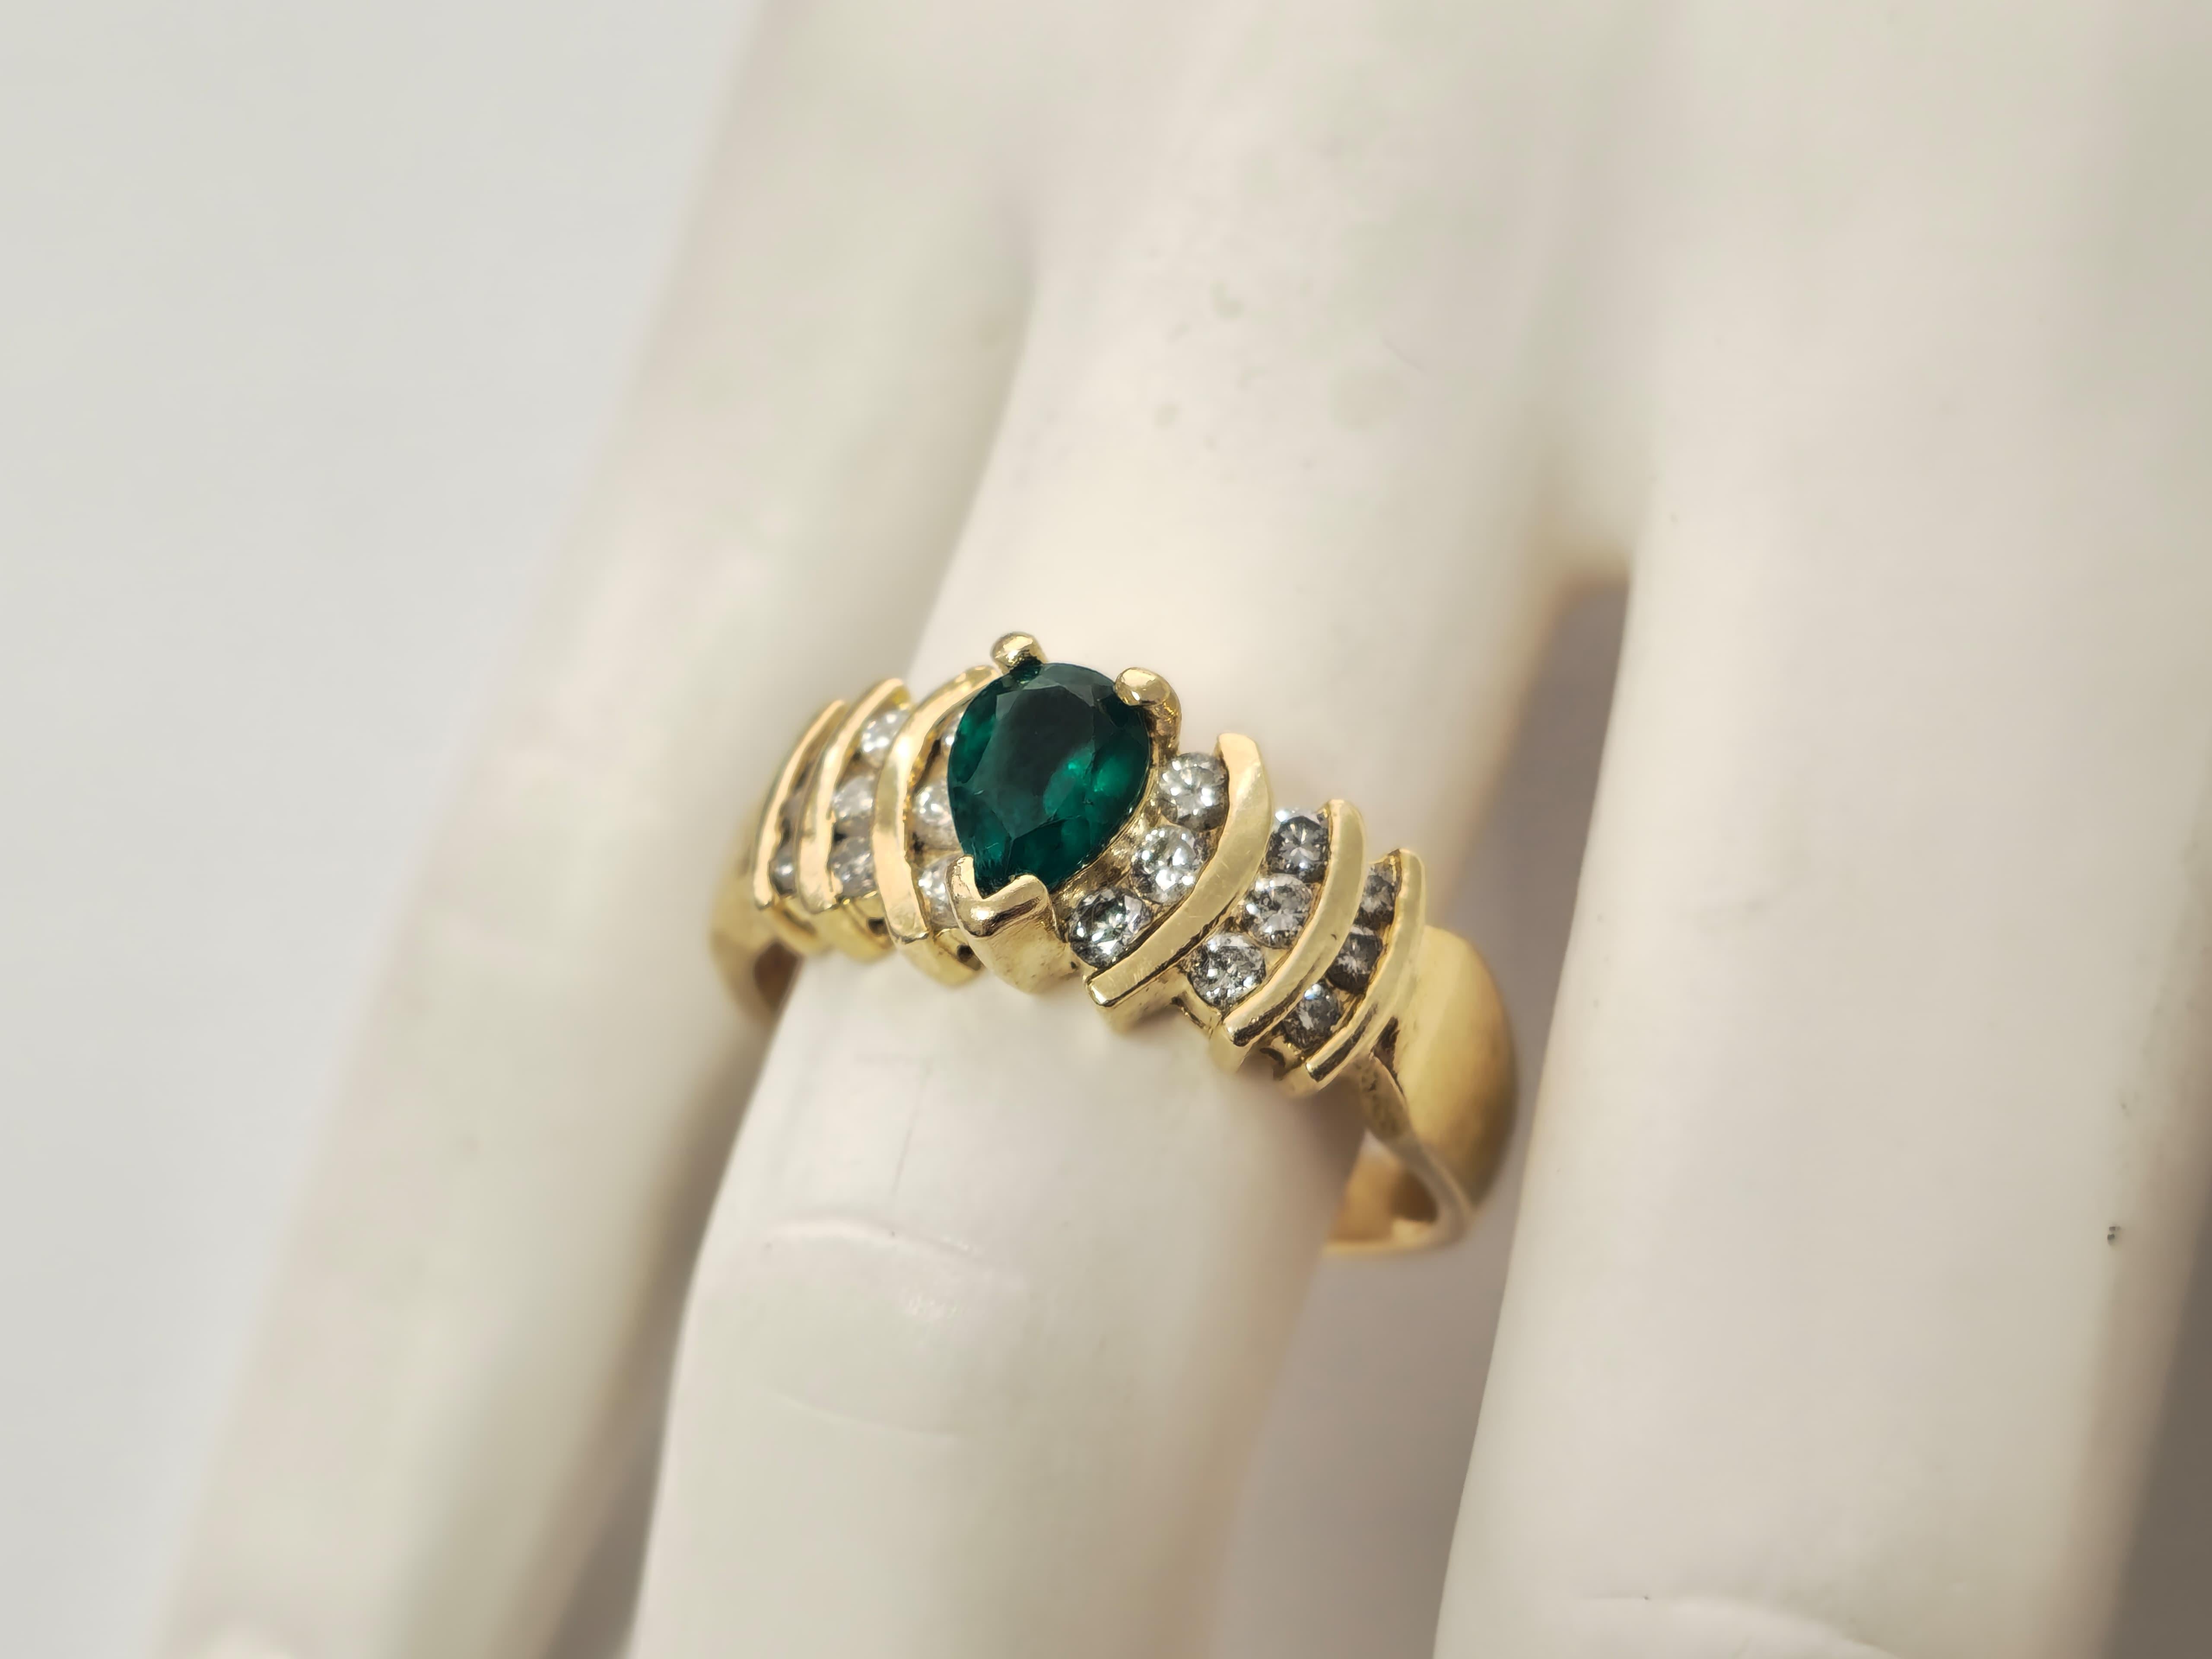 Indulge in elegance with this 14k yellow gold ring. Featuring a captivating 1-carat pear-shaped emerald complemented by 1.87 carats of round diamonds with VS2 clarity and G color, this piece offers sophistication. Ideal for ring resizing, weighing